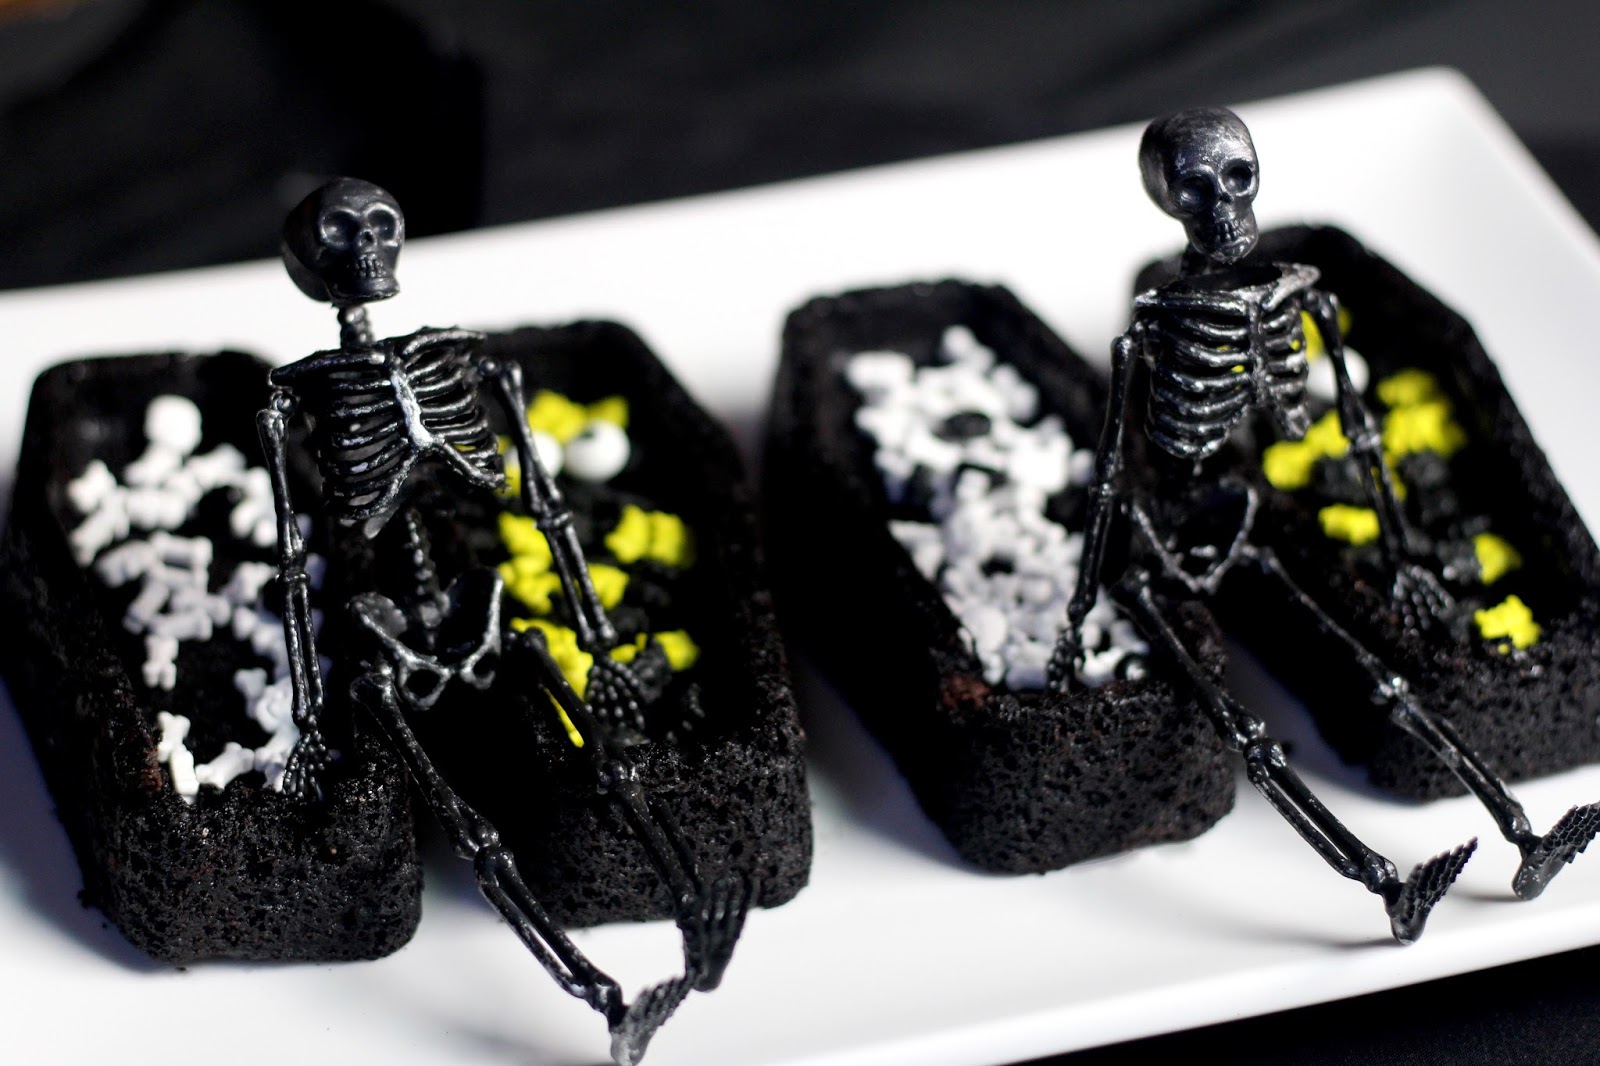 Dark Cocoa Cayenne Coffin Brownies for Halloween – Diary of a Mad Hausfrau